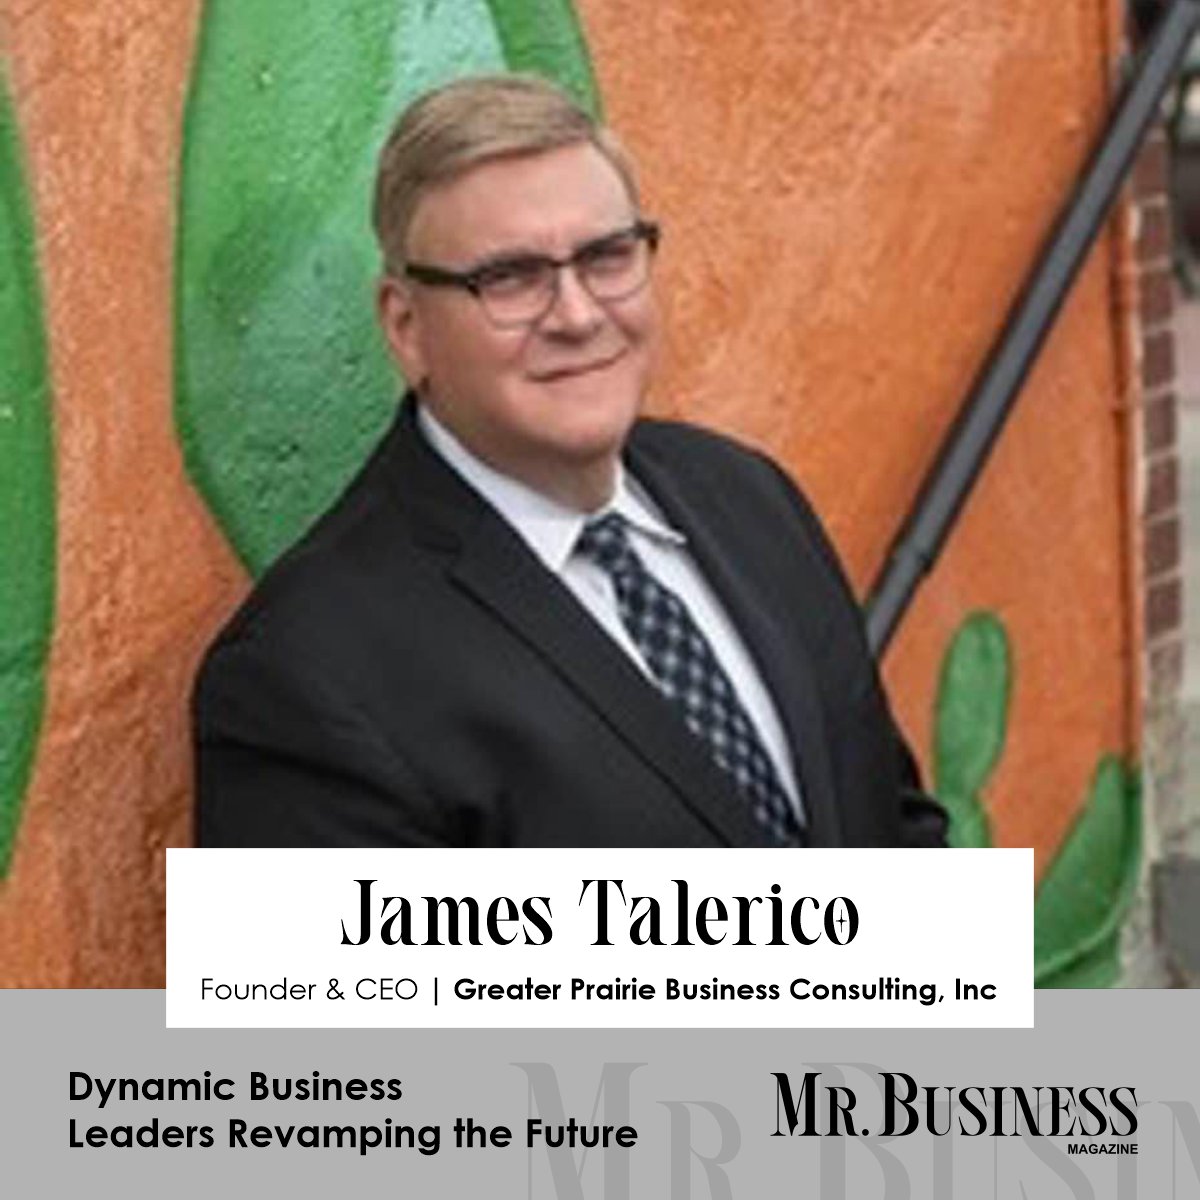 James Talerico - Providing Ideas for Growth Of a Business | Mr. Business Magazine